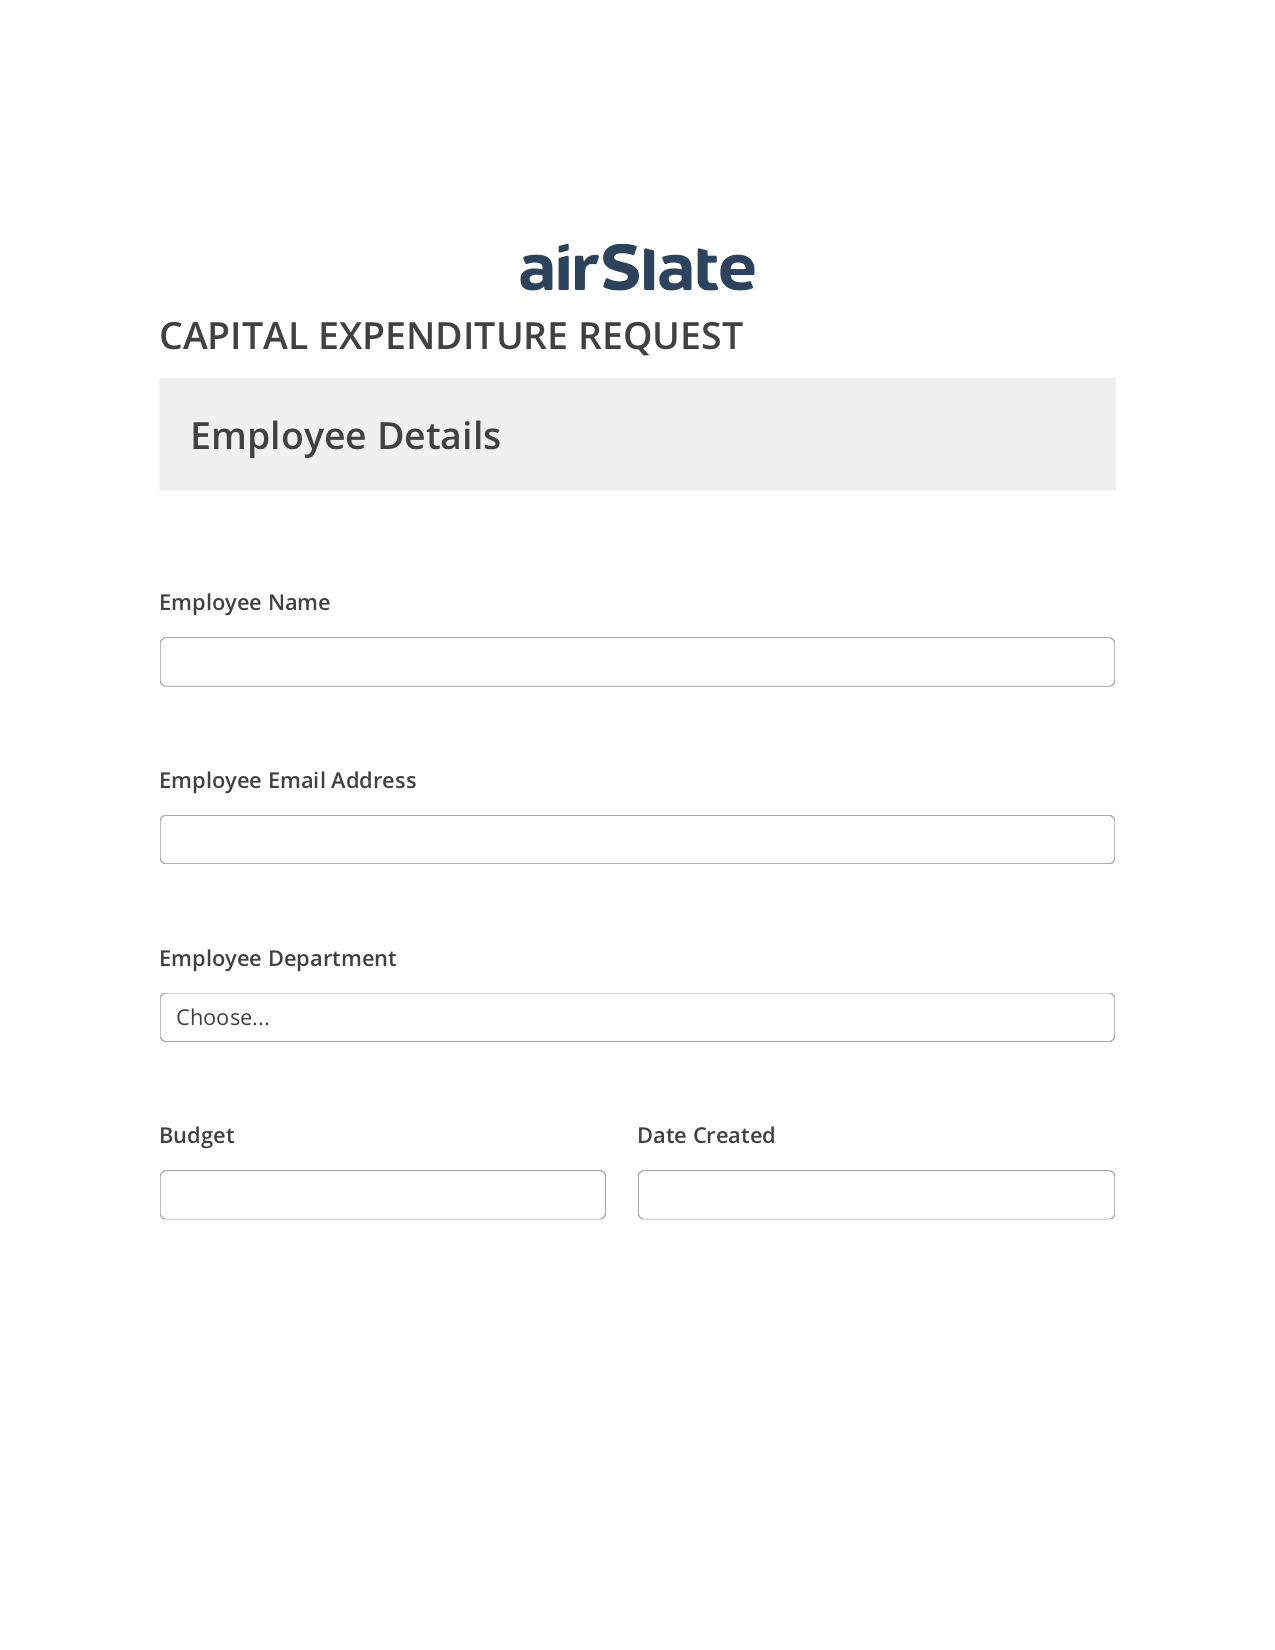 Capital Expenditure Request Approval Workflow Pre-fill Dropdowns from Smartsheet Bot, Lock the Slate Bot, Export to